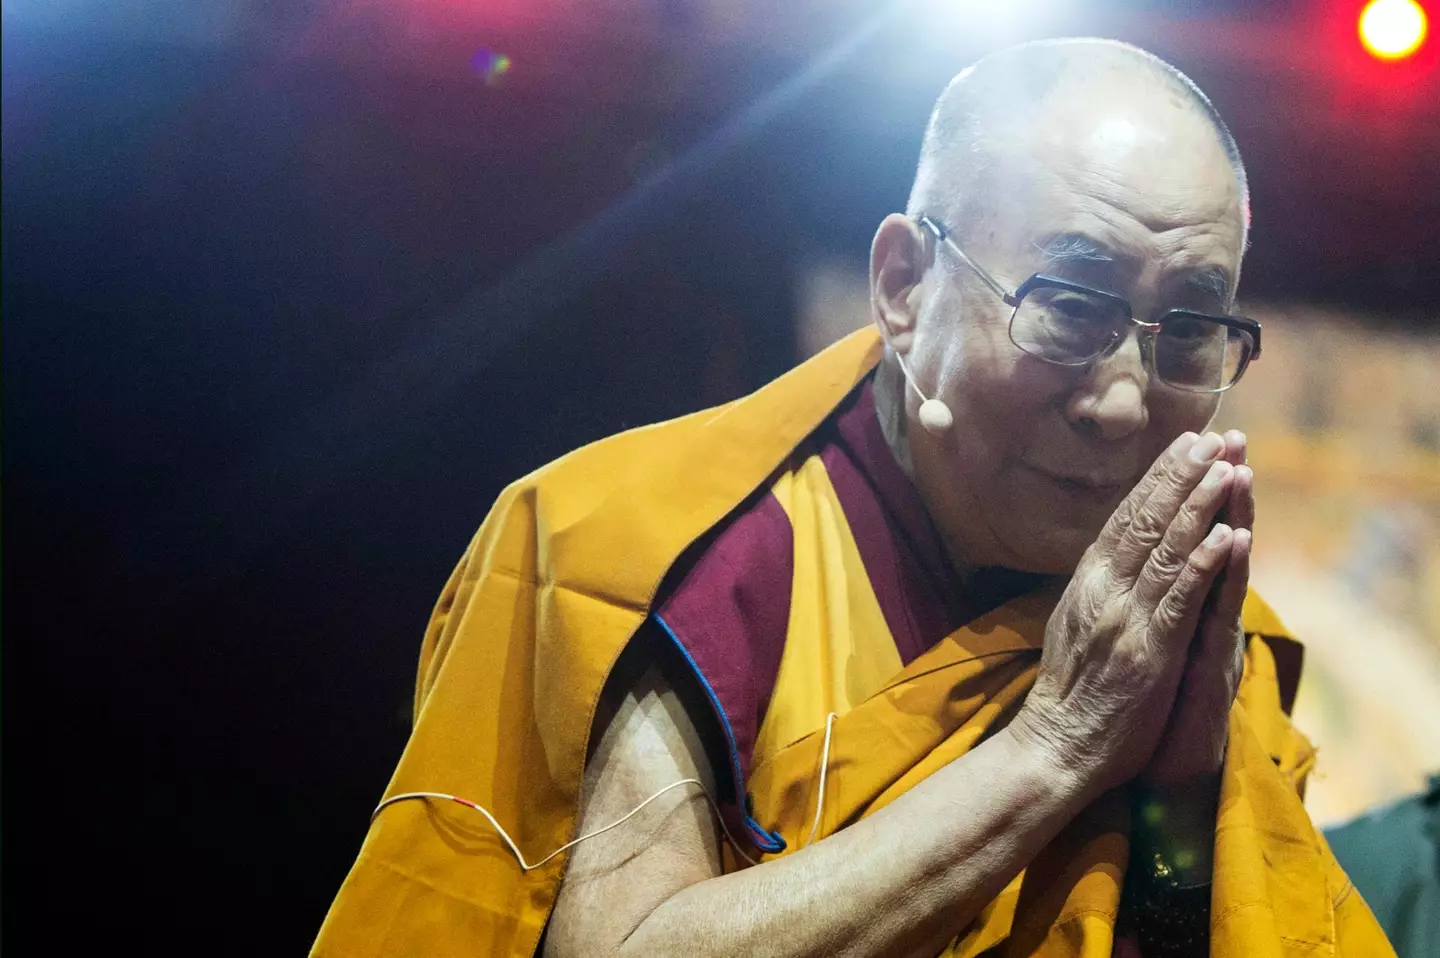 Tenzin Gyatso, the 14th Dalai Lama, has said that his own successor will not be reincarnated in Chinese controlled territory.